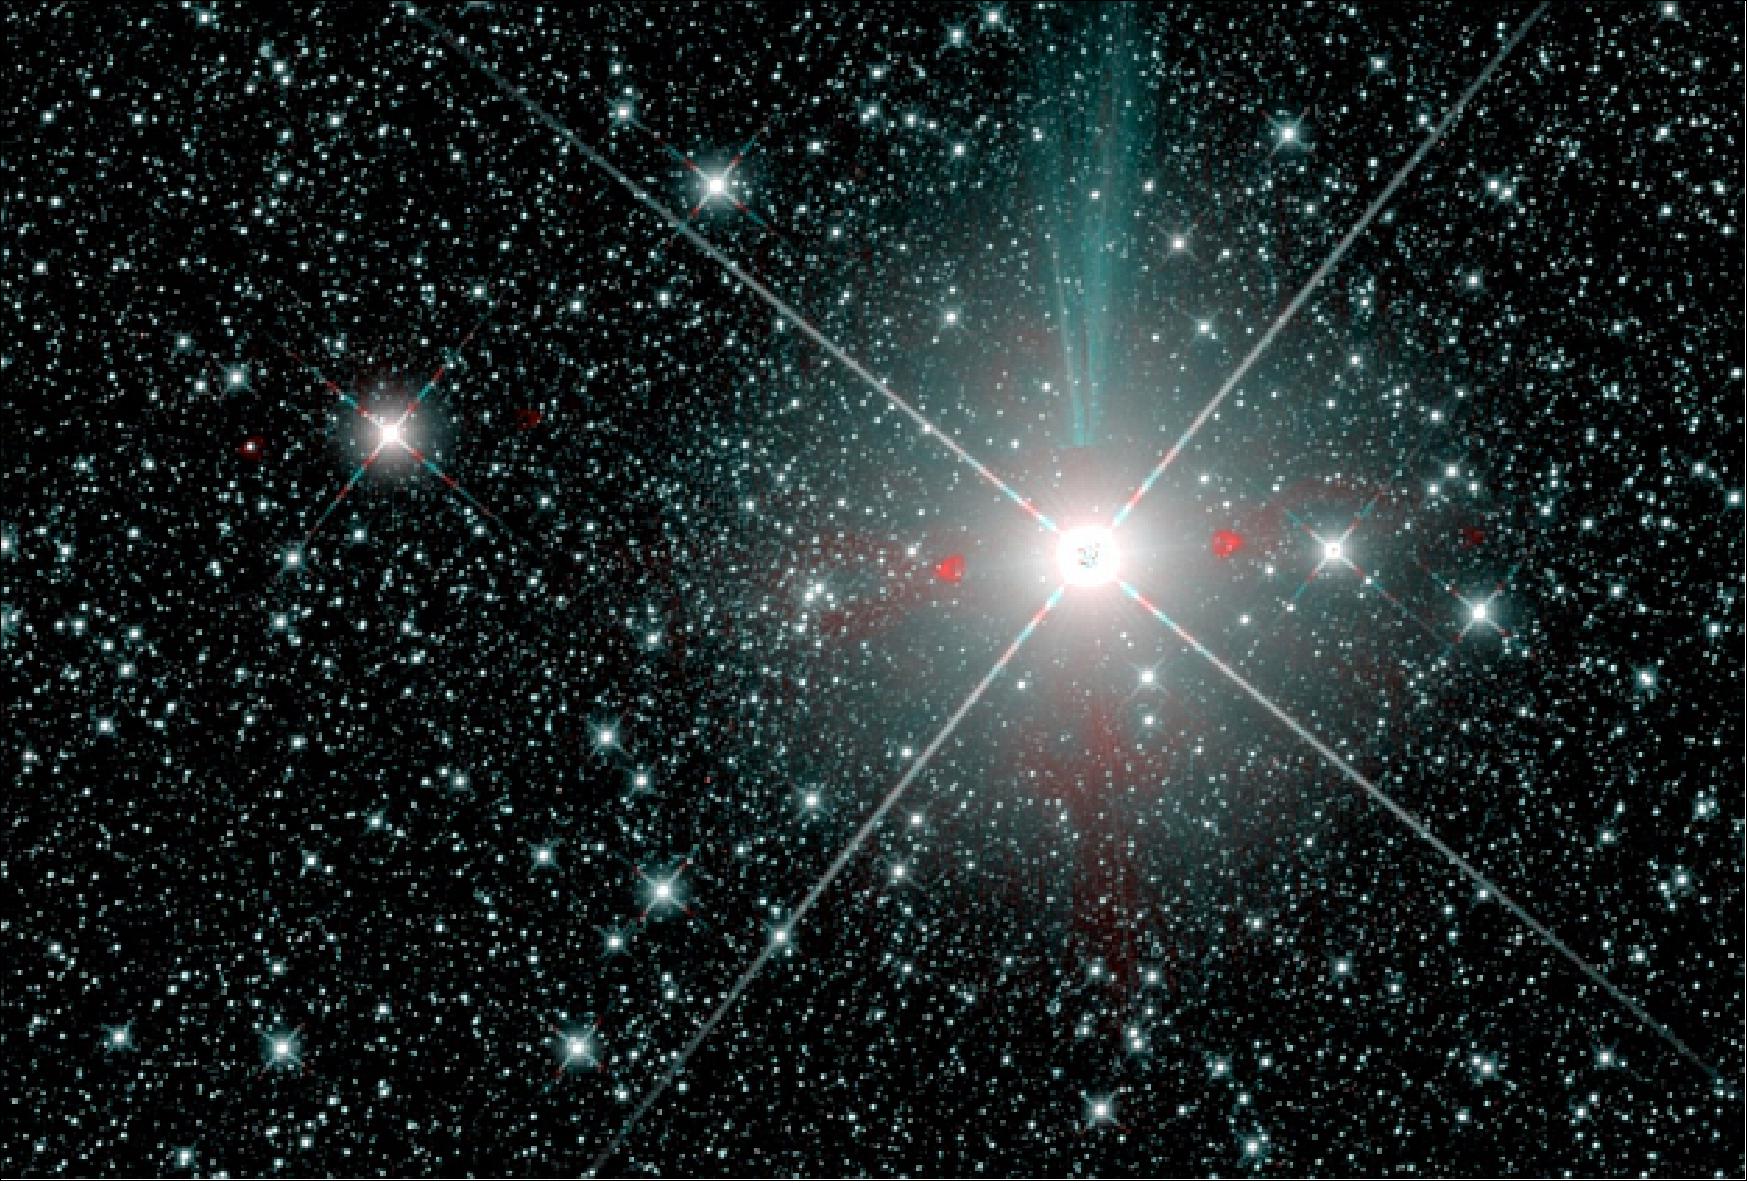 Figure 62: The brightest star in this WISE (Wide-Field Infrared Survey Explorer) image is Sirius, the brightest star in the night sky. To the left of Sirius, and centered on this image, is Gaia 1, a massive star cluster discovered by scientists mining Gaia data (image credit: Sergey Koposov; NASA/JPL; D. Lang, 2014; A.M. Meisner et al. 2017)